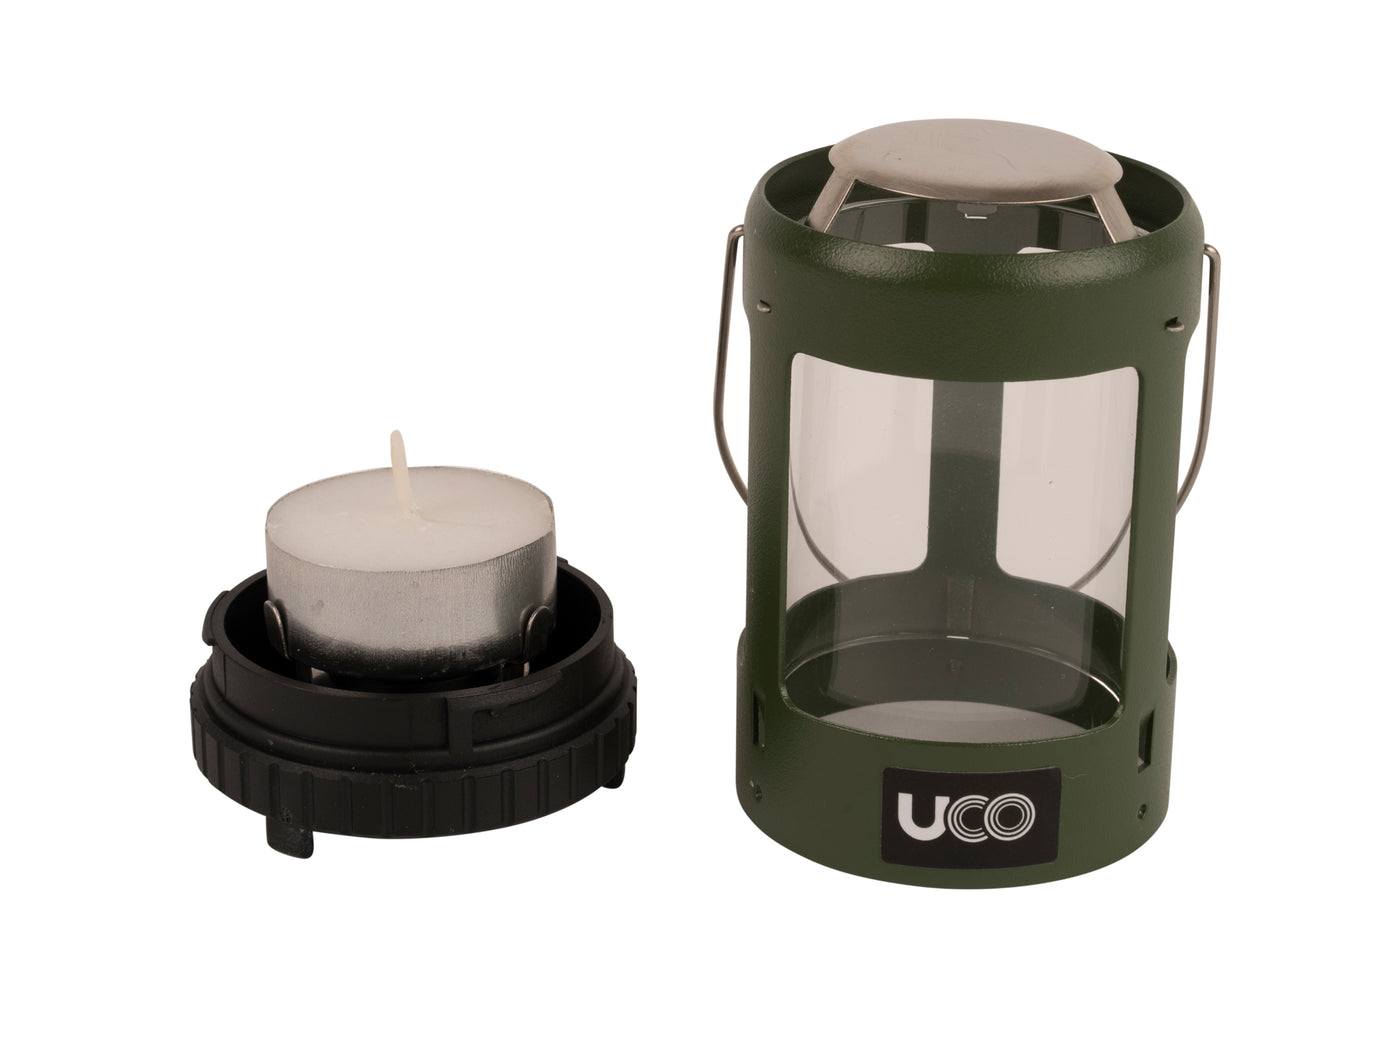 UCO Nine Hour Candles - 3-Pack